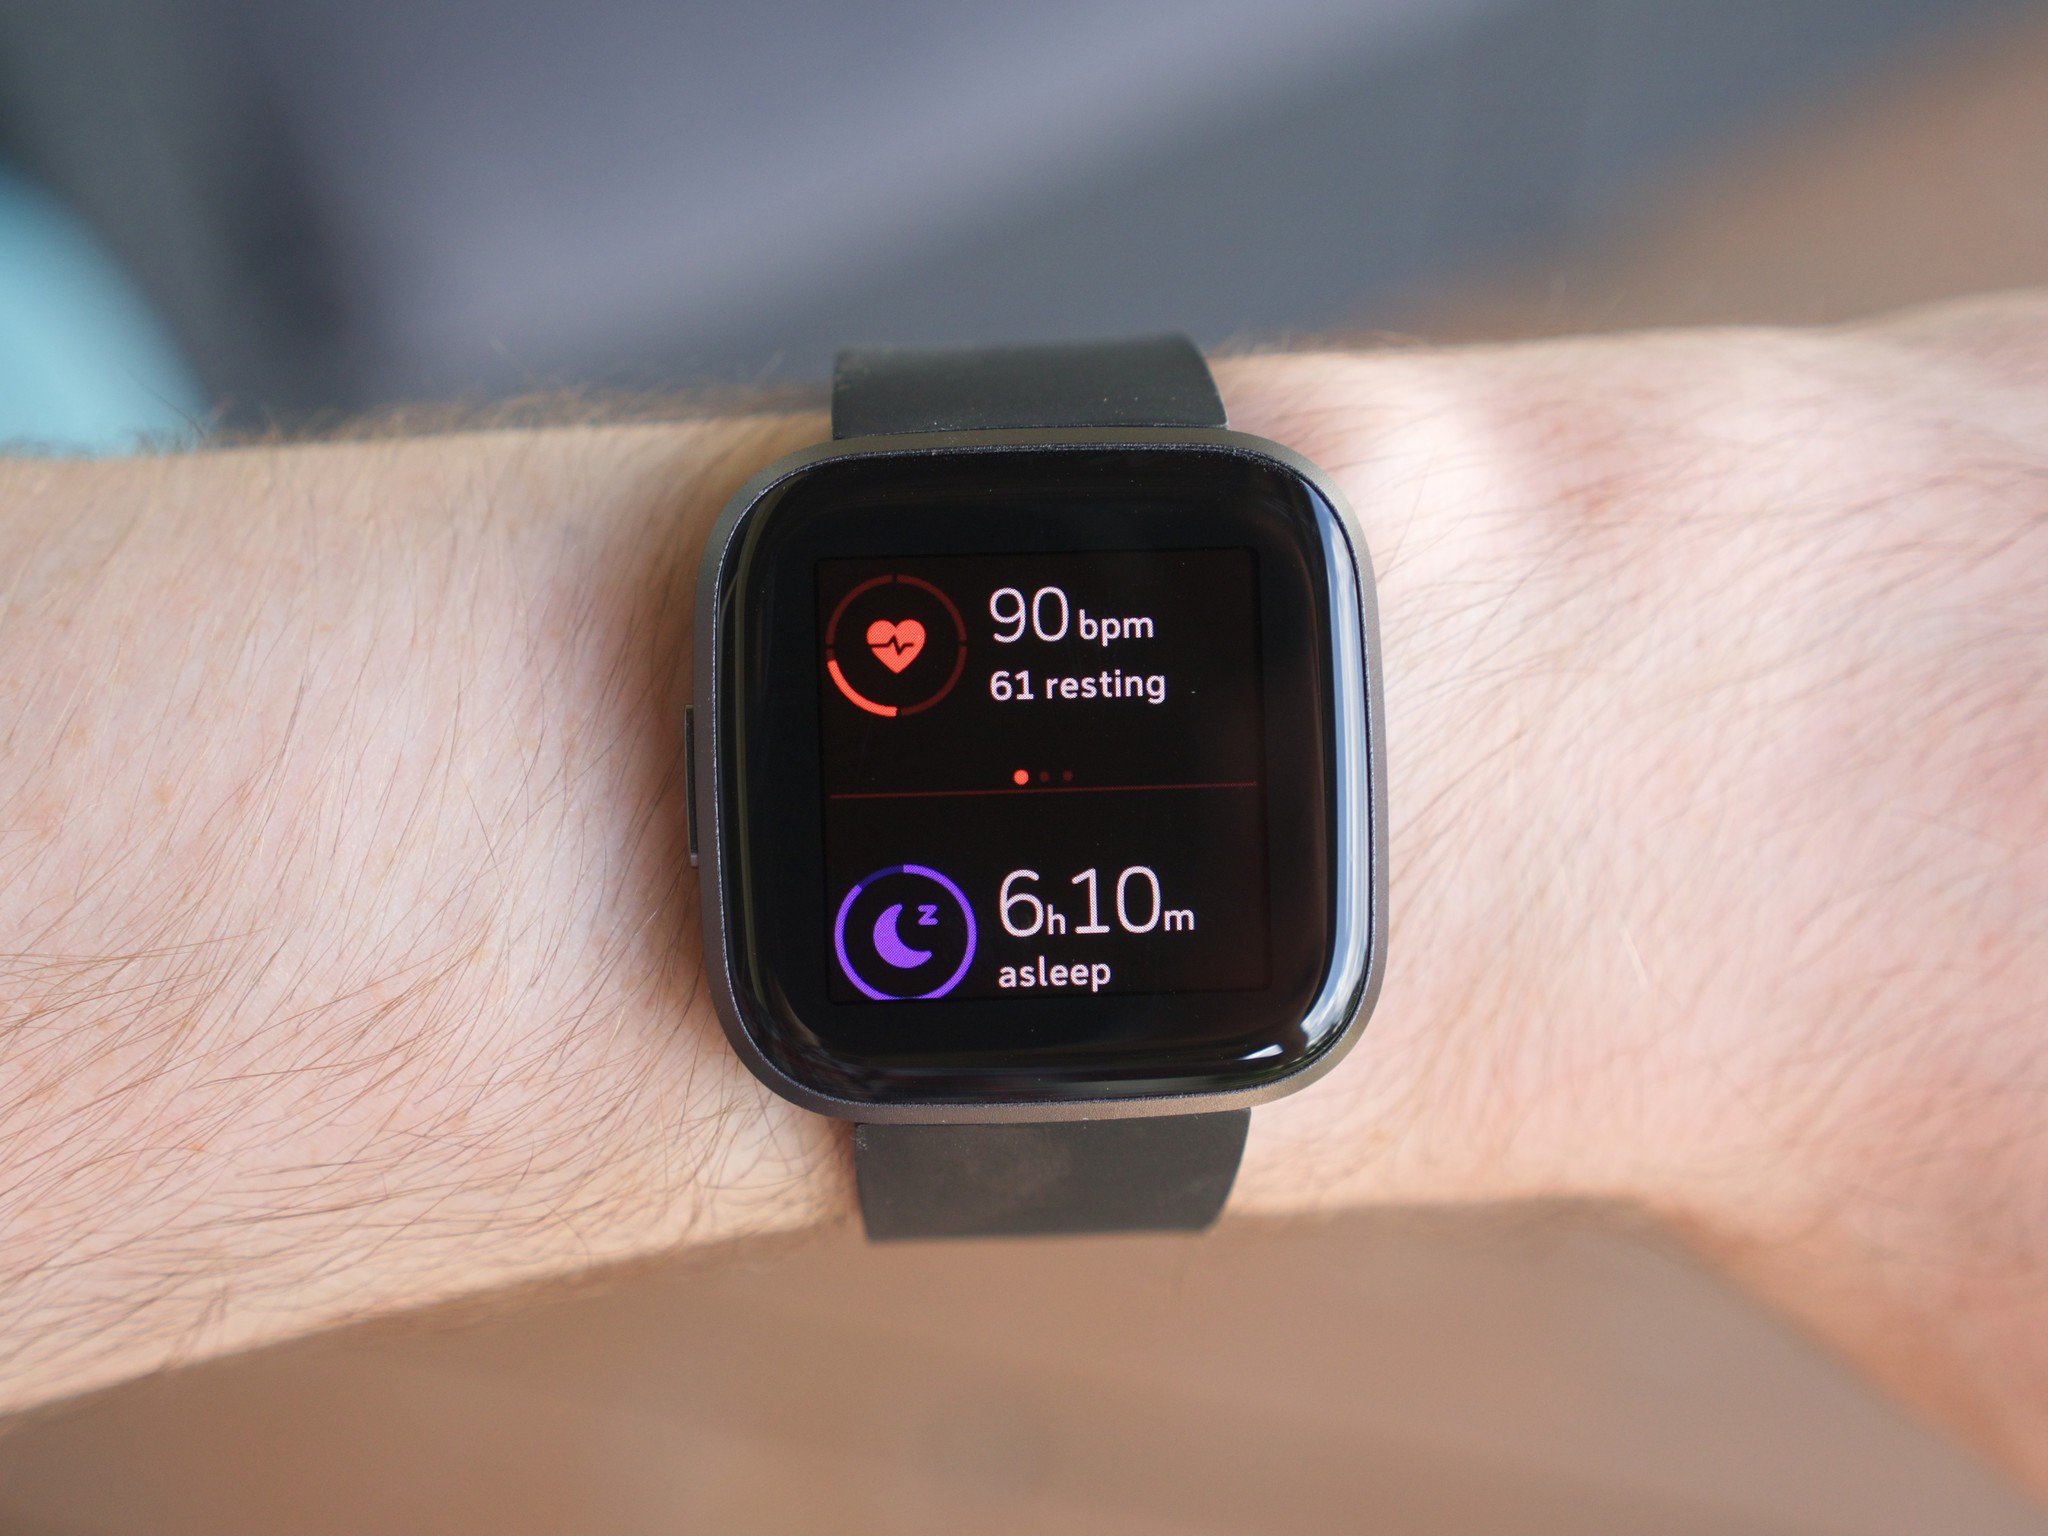 personalizing-time-changing-the-clock-face-on-your-fitbit-versa